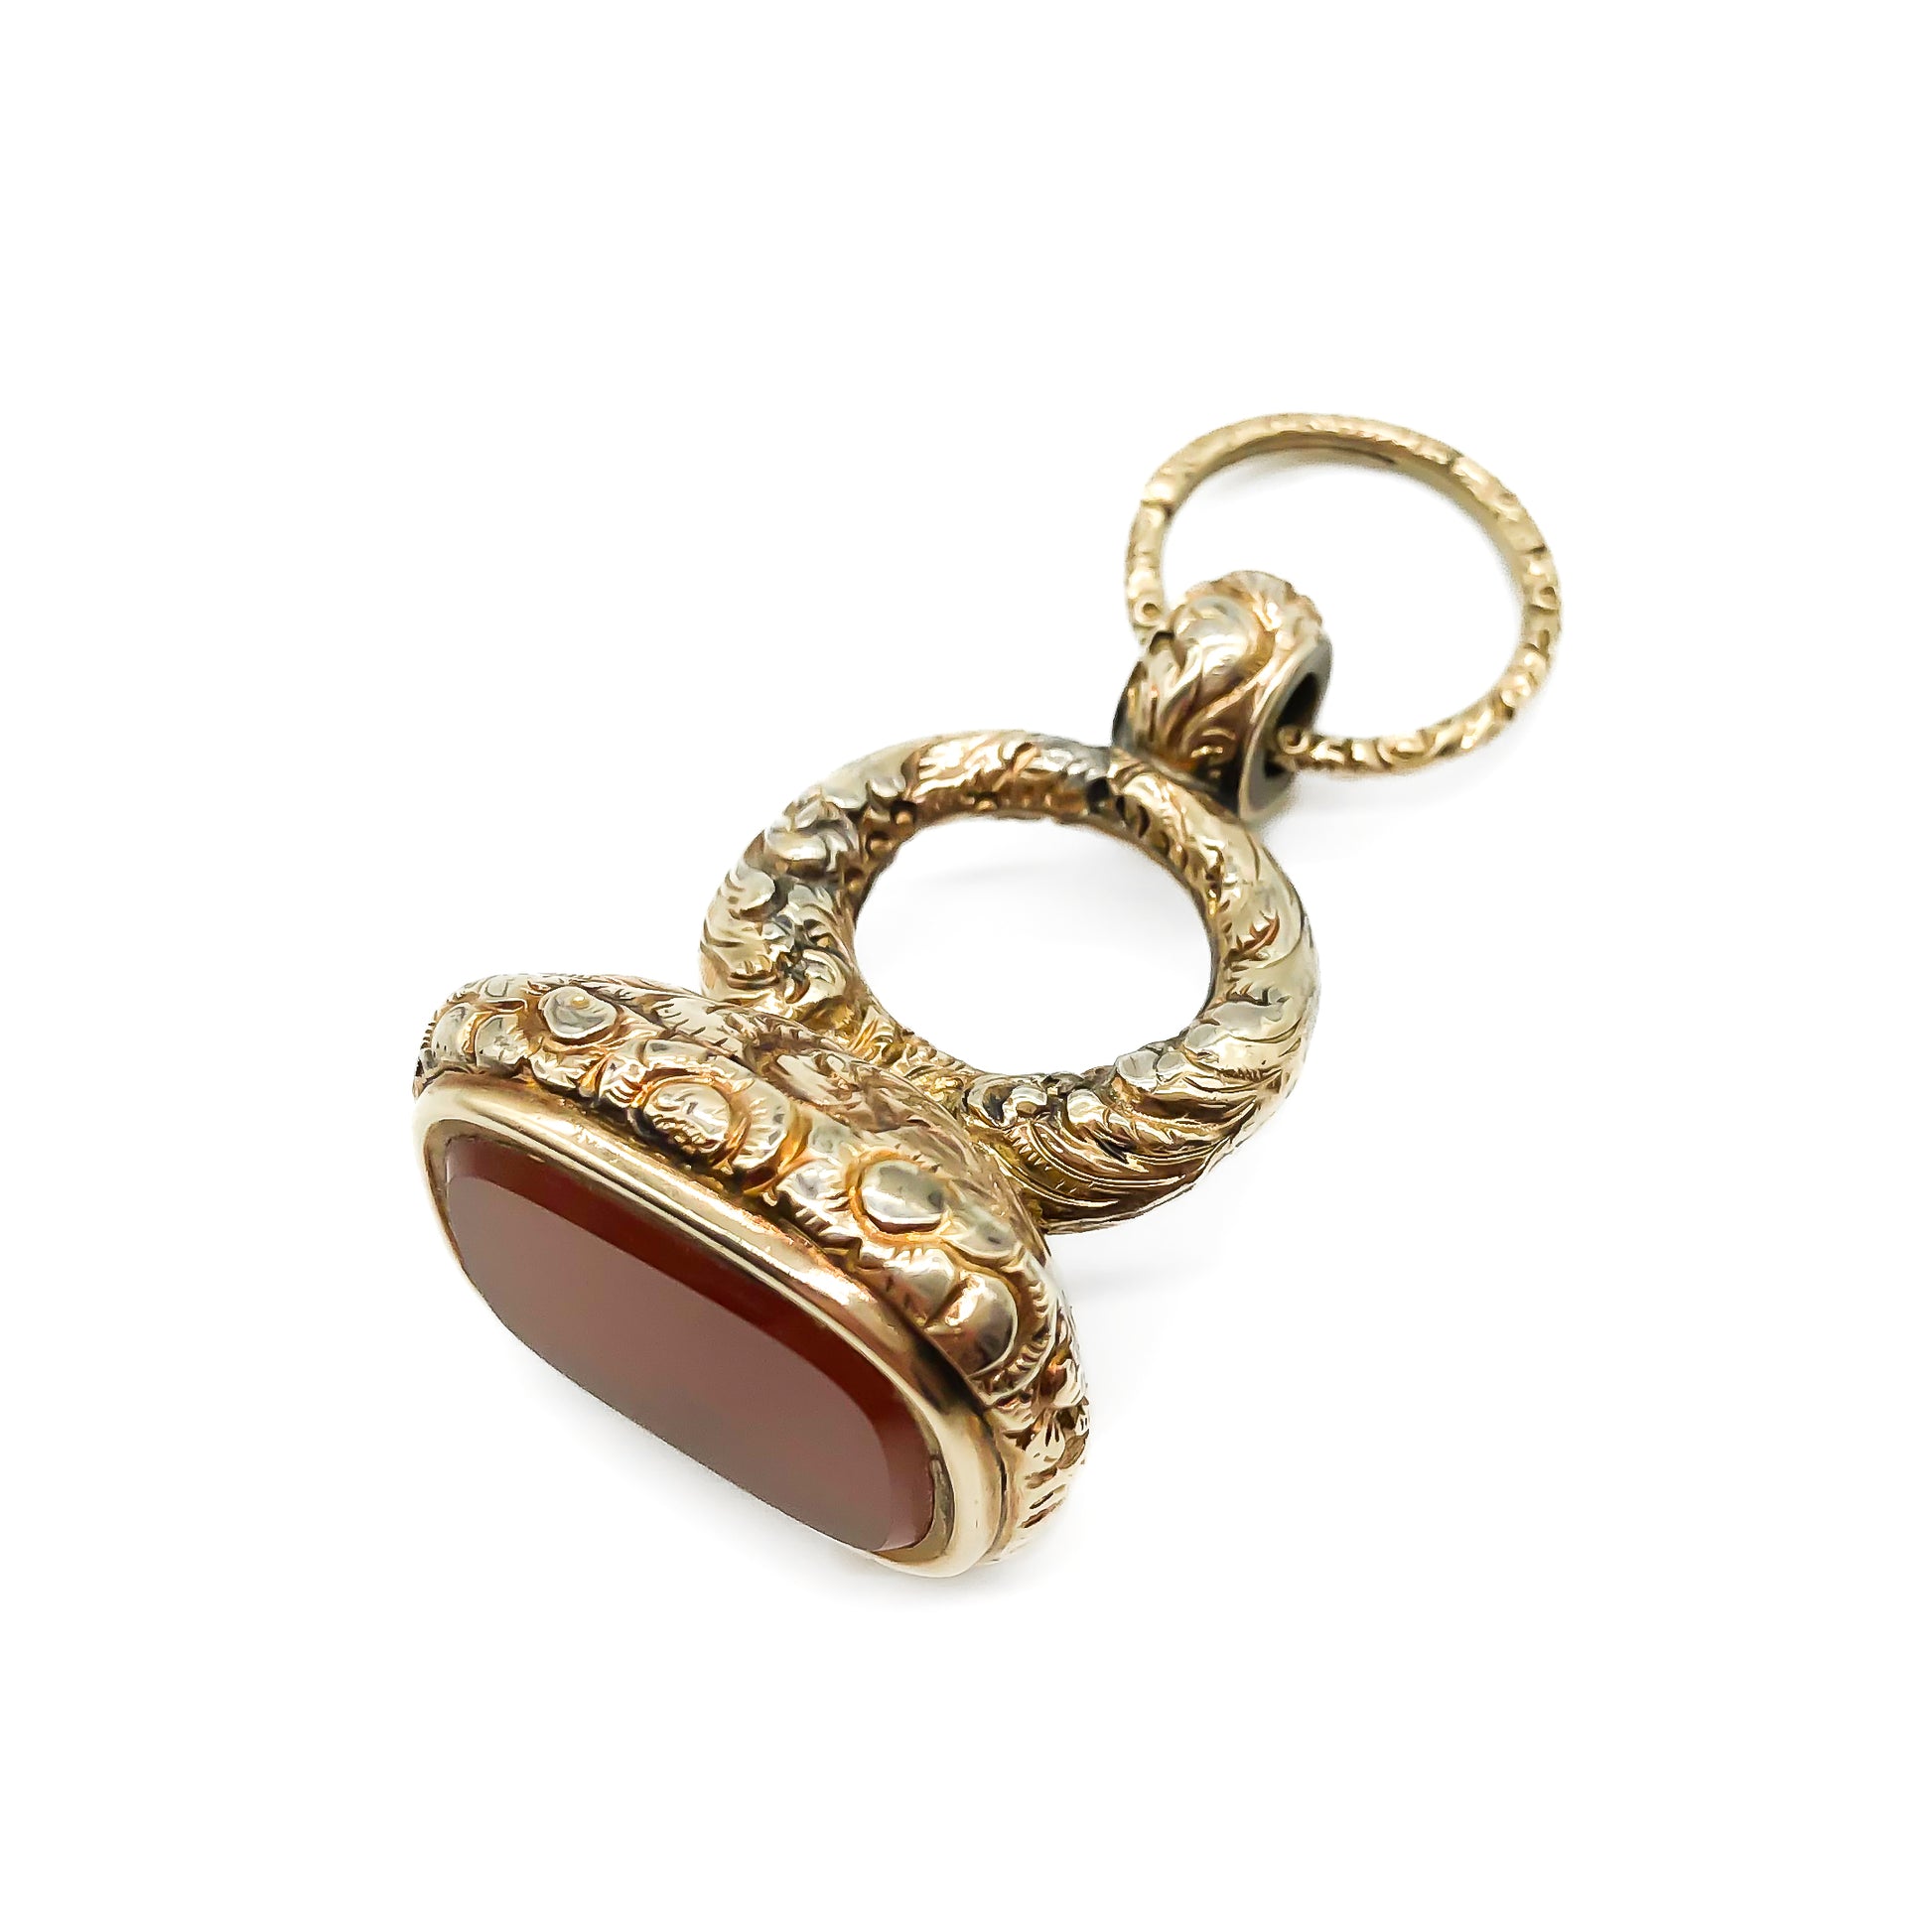 Large beautifully engraved gold cased Victorian seal set with a carnelian stone. Split ring attached.